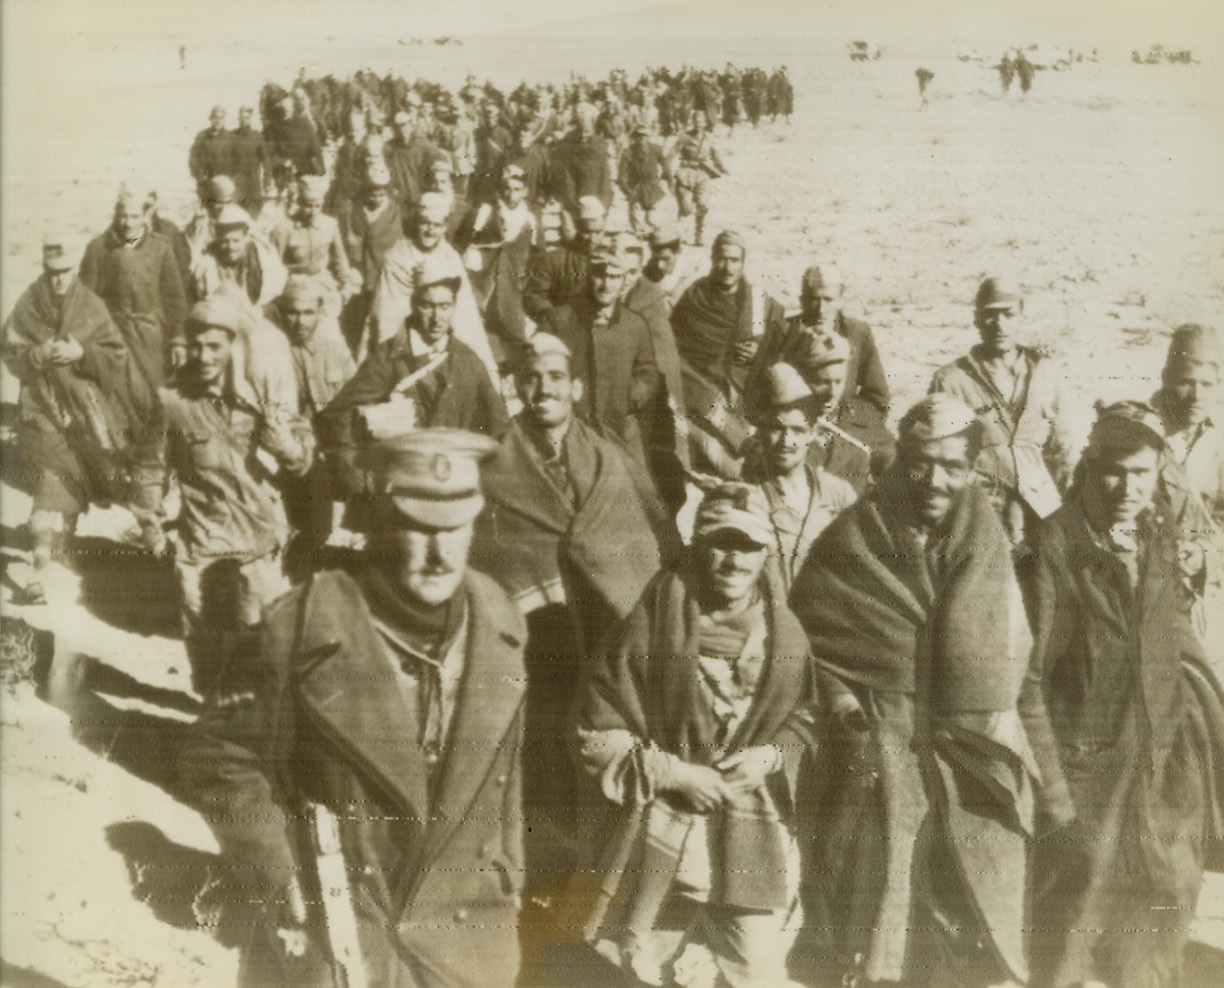 Nazi Prisoners Near Tripoli, 1/25/1943. North Africa—Italians and Germans who were captured near Tripoli are shown being marched back to a waiting transport. Note that the prisoners have been carefully separated, with the Italians in front and the Germans behind. Photo radioed from Cairo at noon today.Credit: ACME radiophoto.;